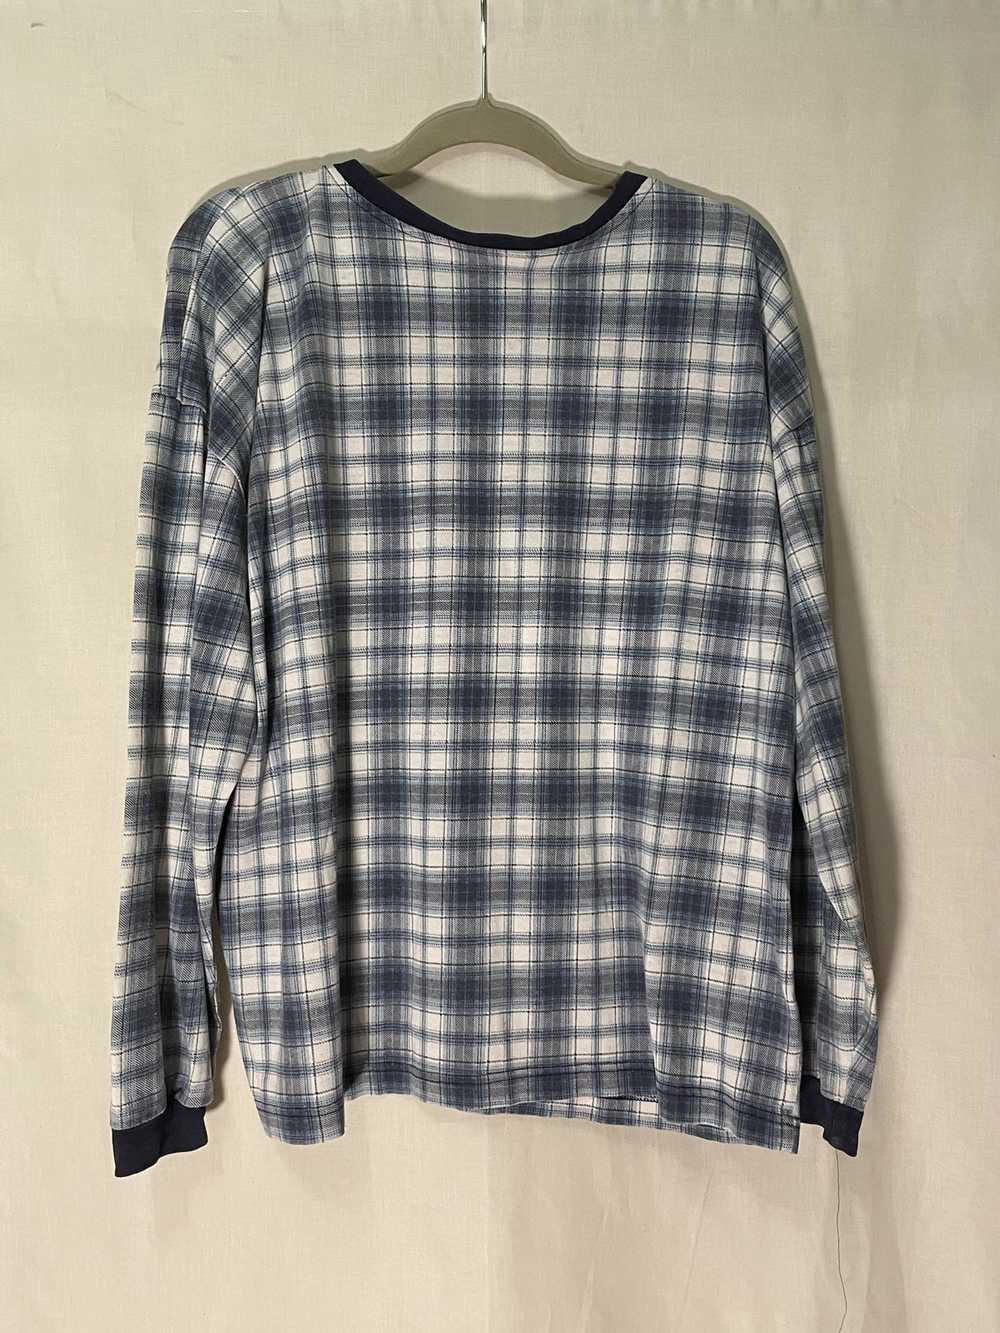 Guess Vintage Guess Longsleeve - image 2